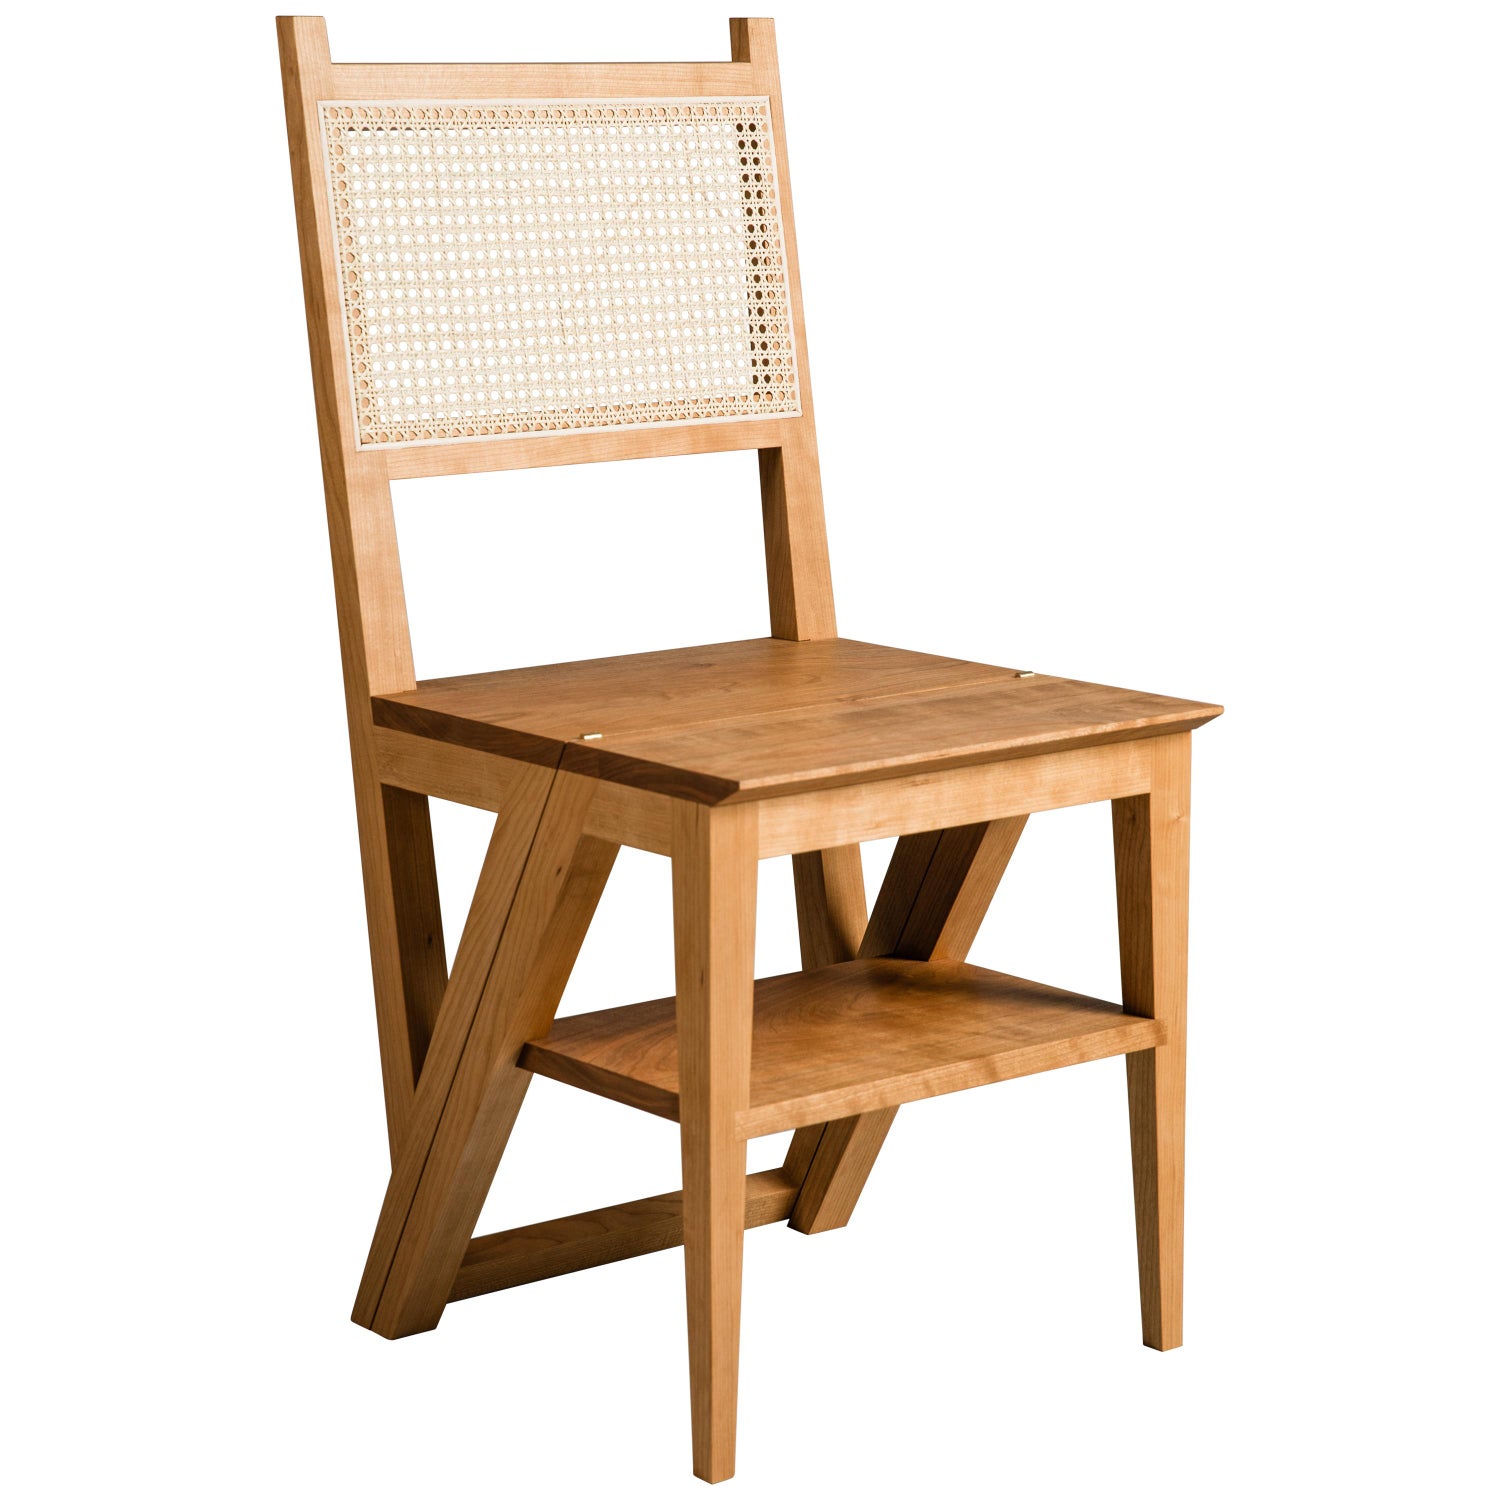 cherry stepladder chair library chair transforming chair and step stool